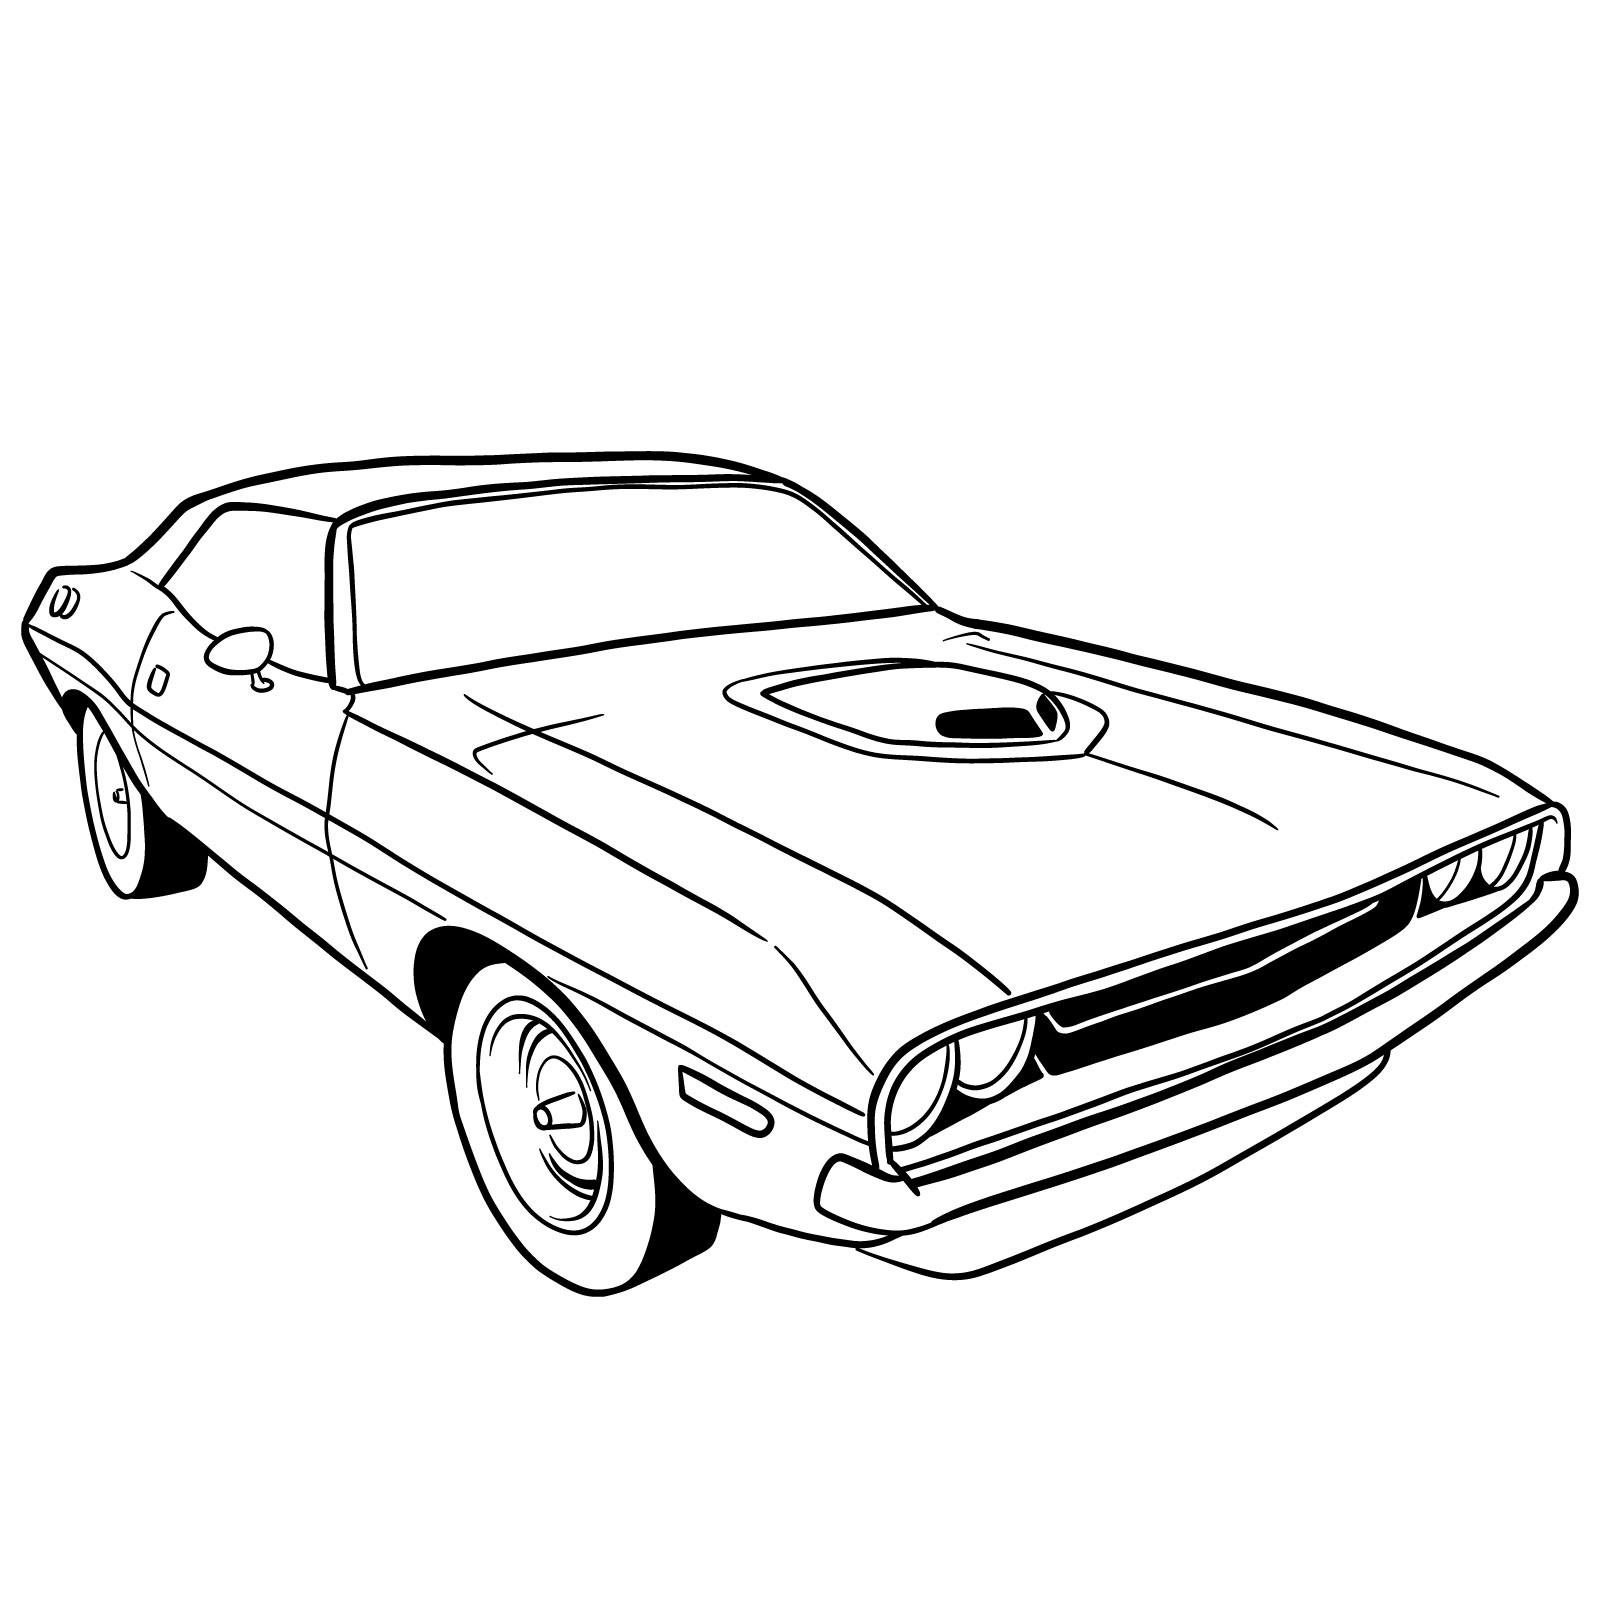 How to draw Dodge Challenger 1970 - coloring